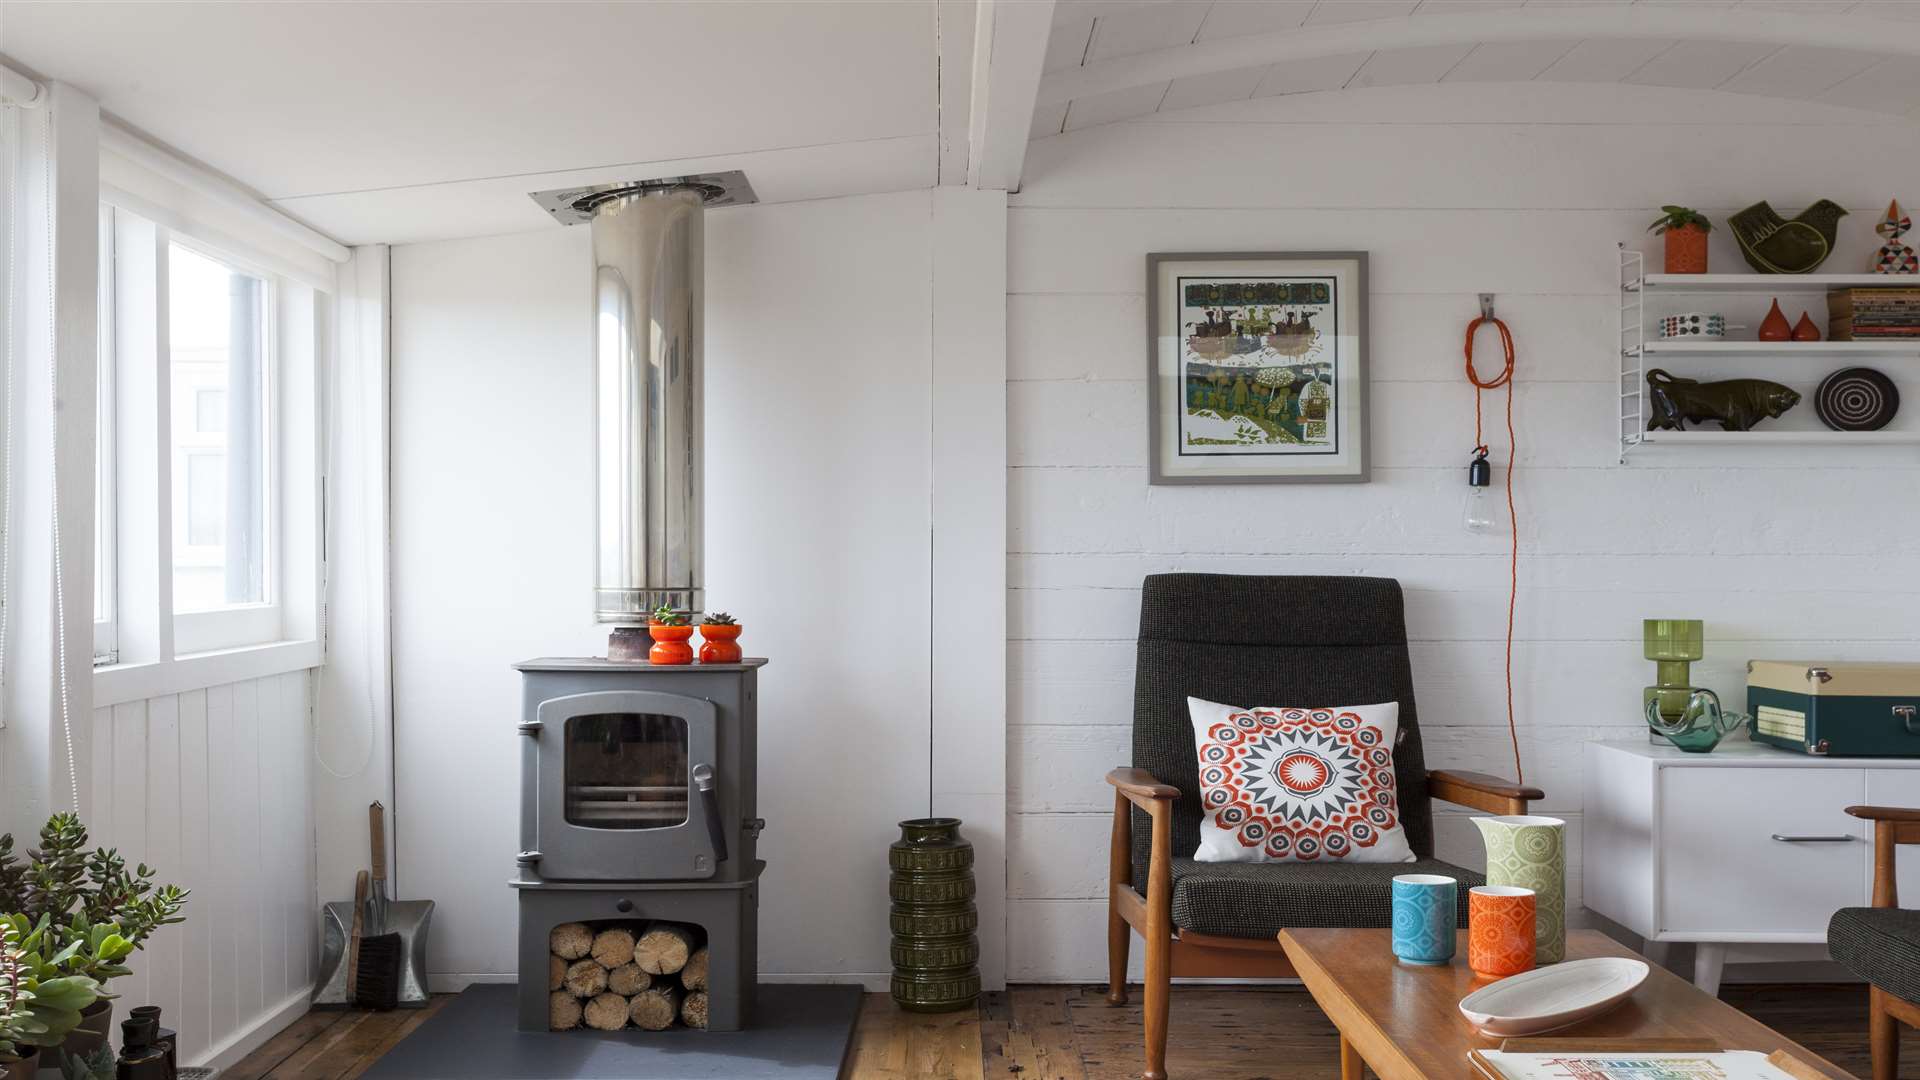 The living room sits within the original railway carriage and the space had been divided into two rooms. At night, beams from the nearby lighthouse flash across the room and a wood burner keeps the place warm.